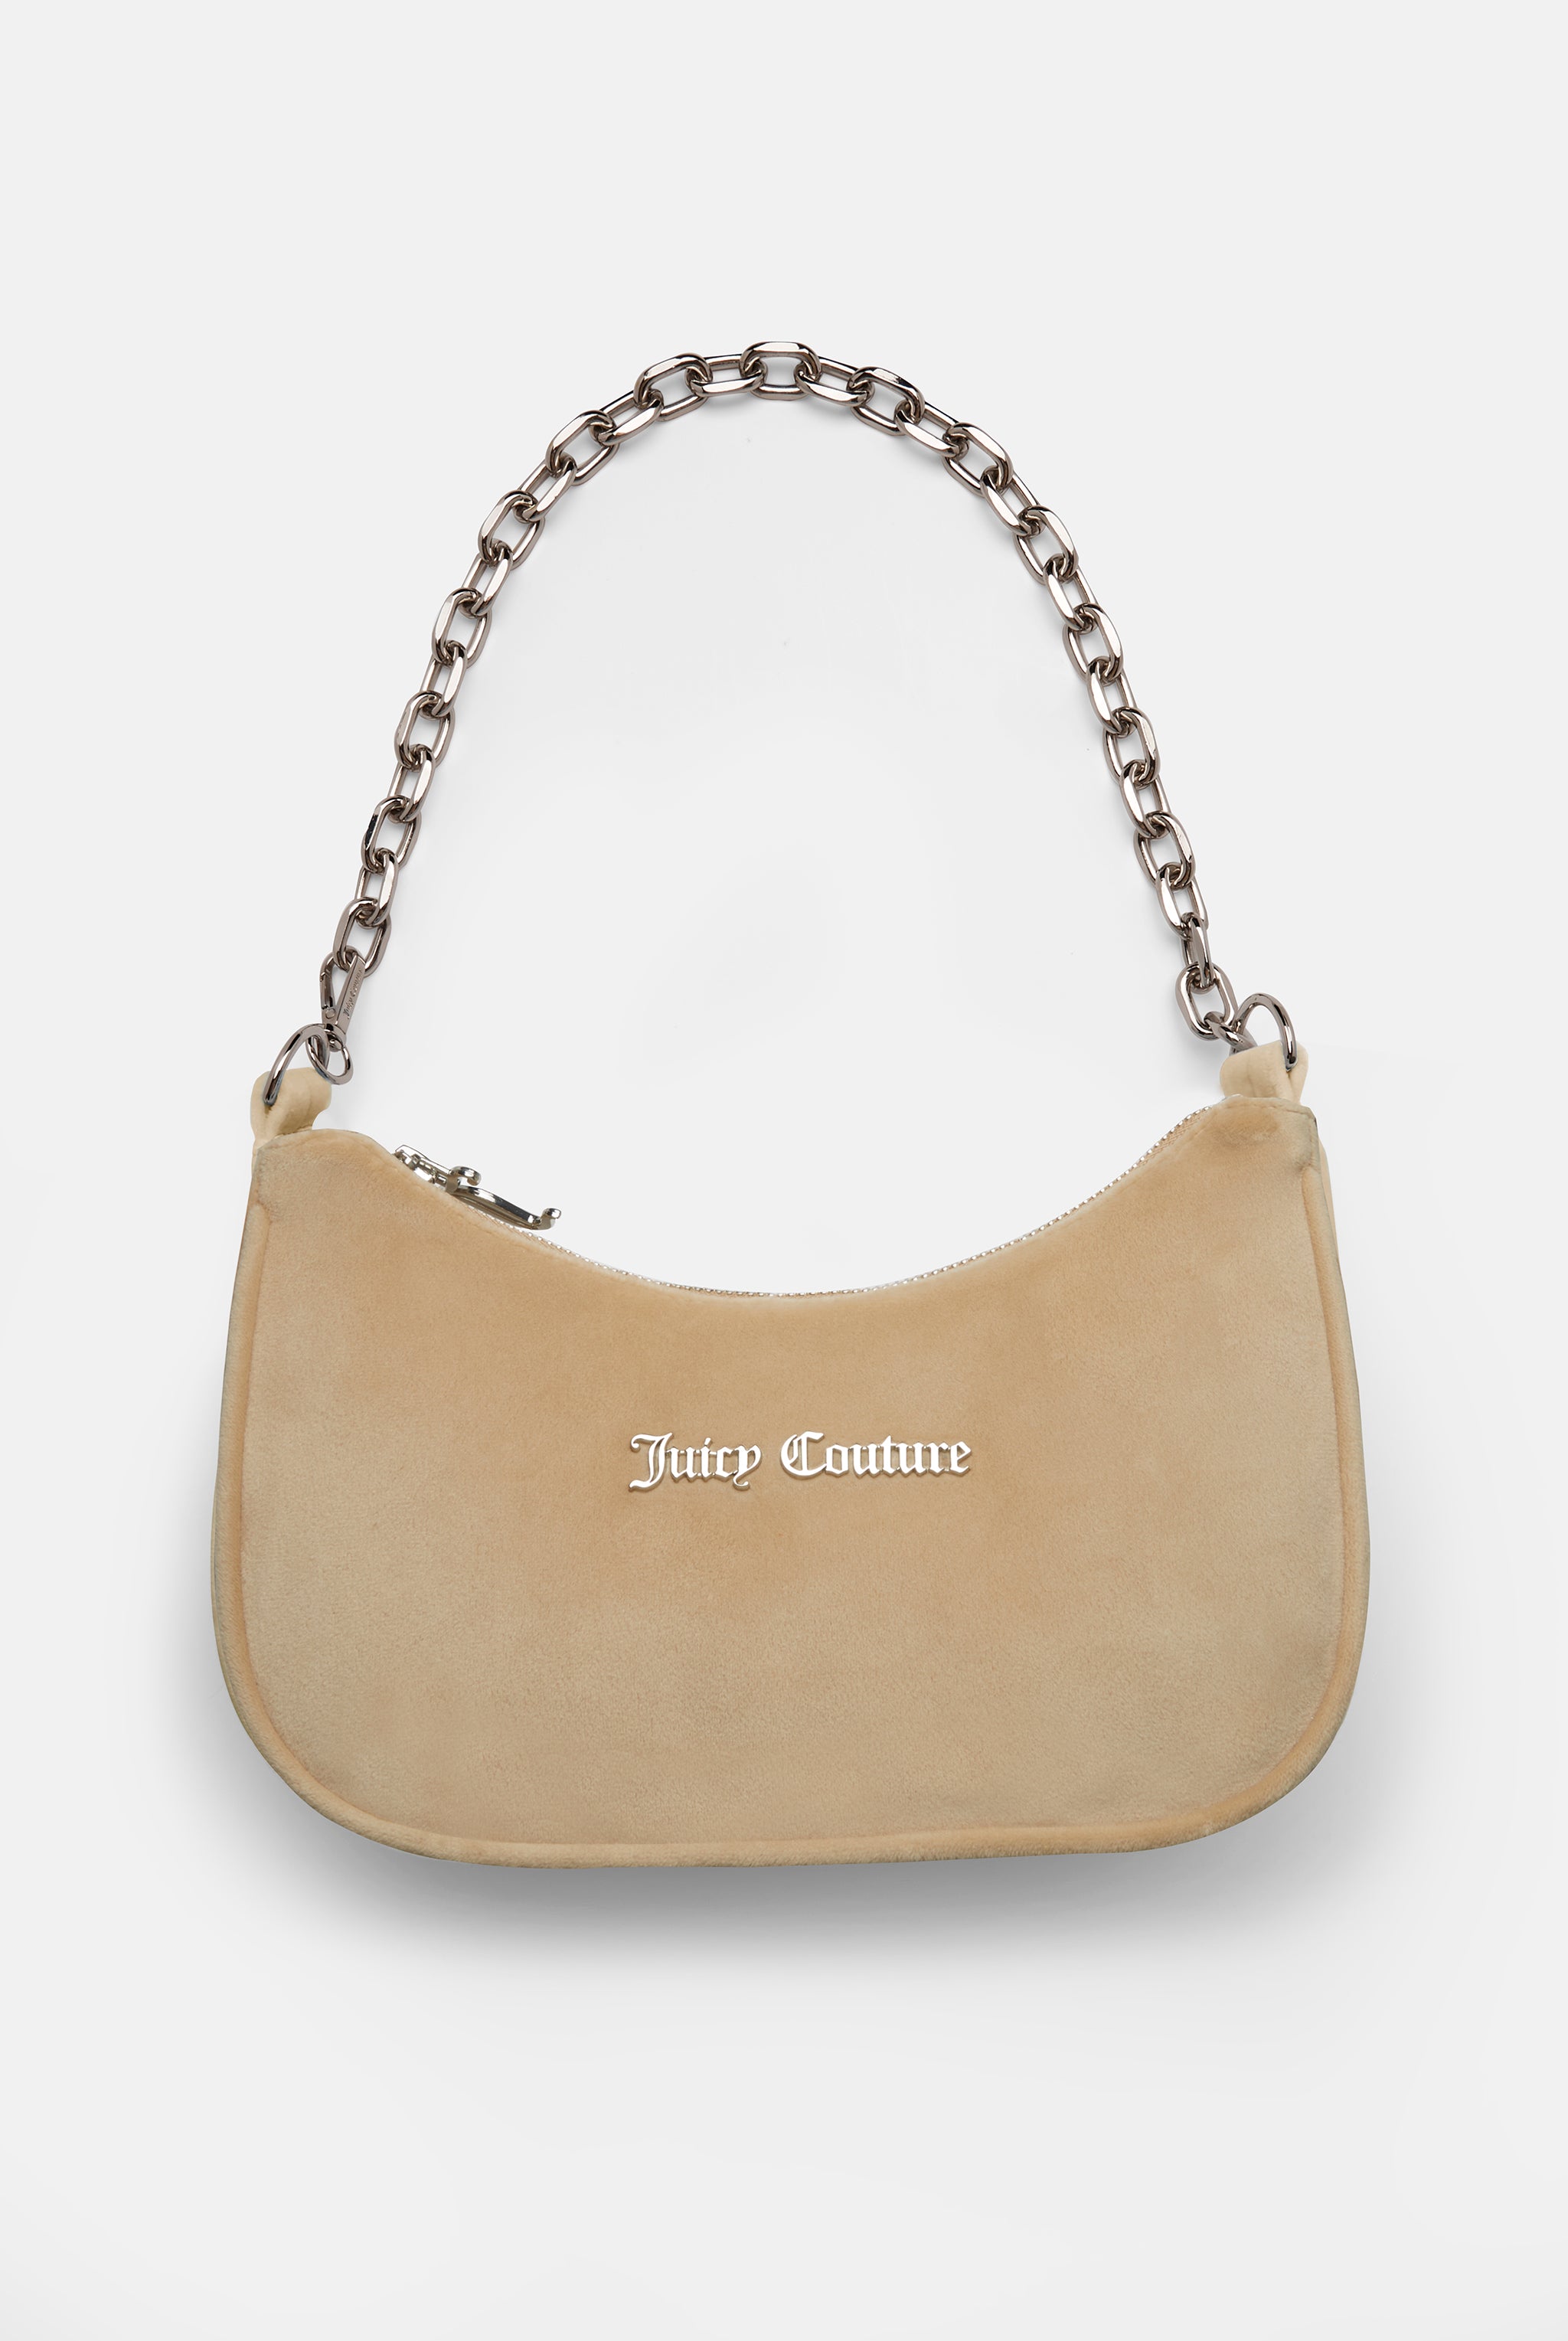 Juicy Couture Velour DayDreamer Bag in Rich Camel. $198.00 | Juicy couture  bags, Bags, Handbag